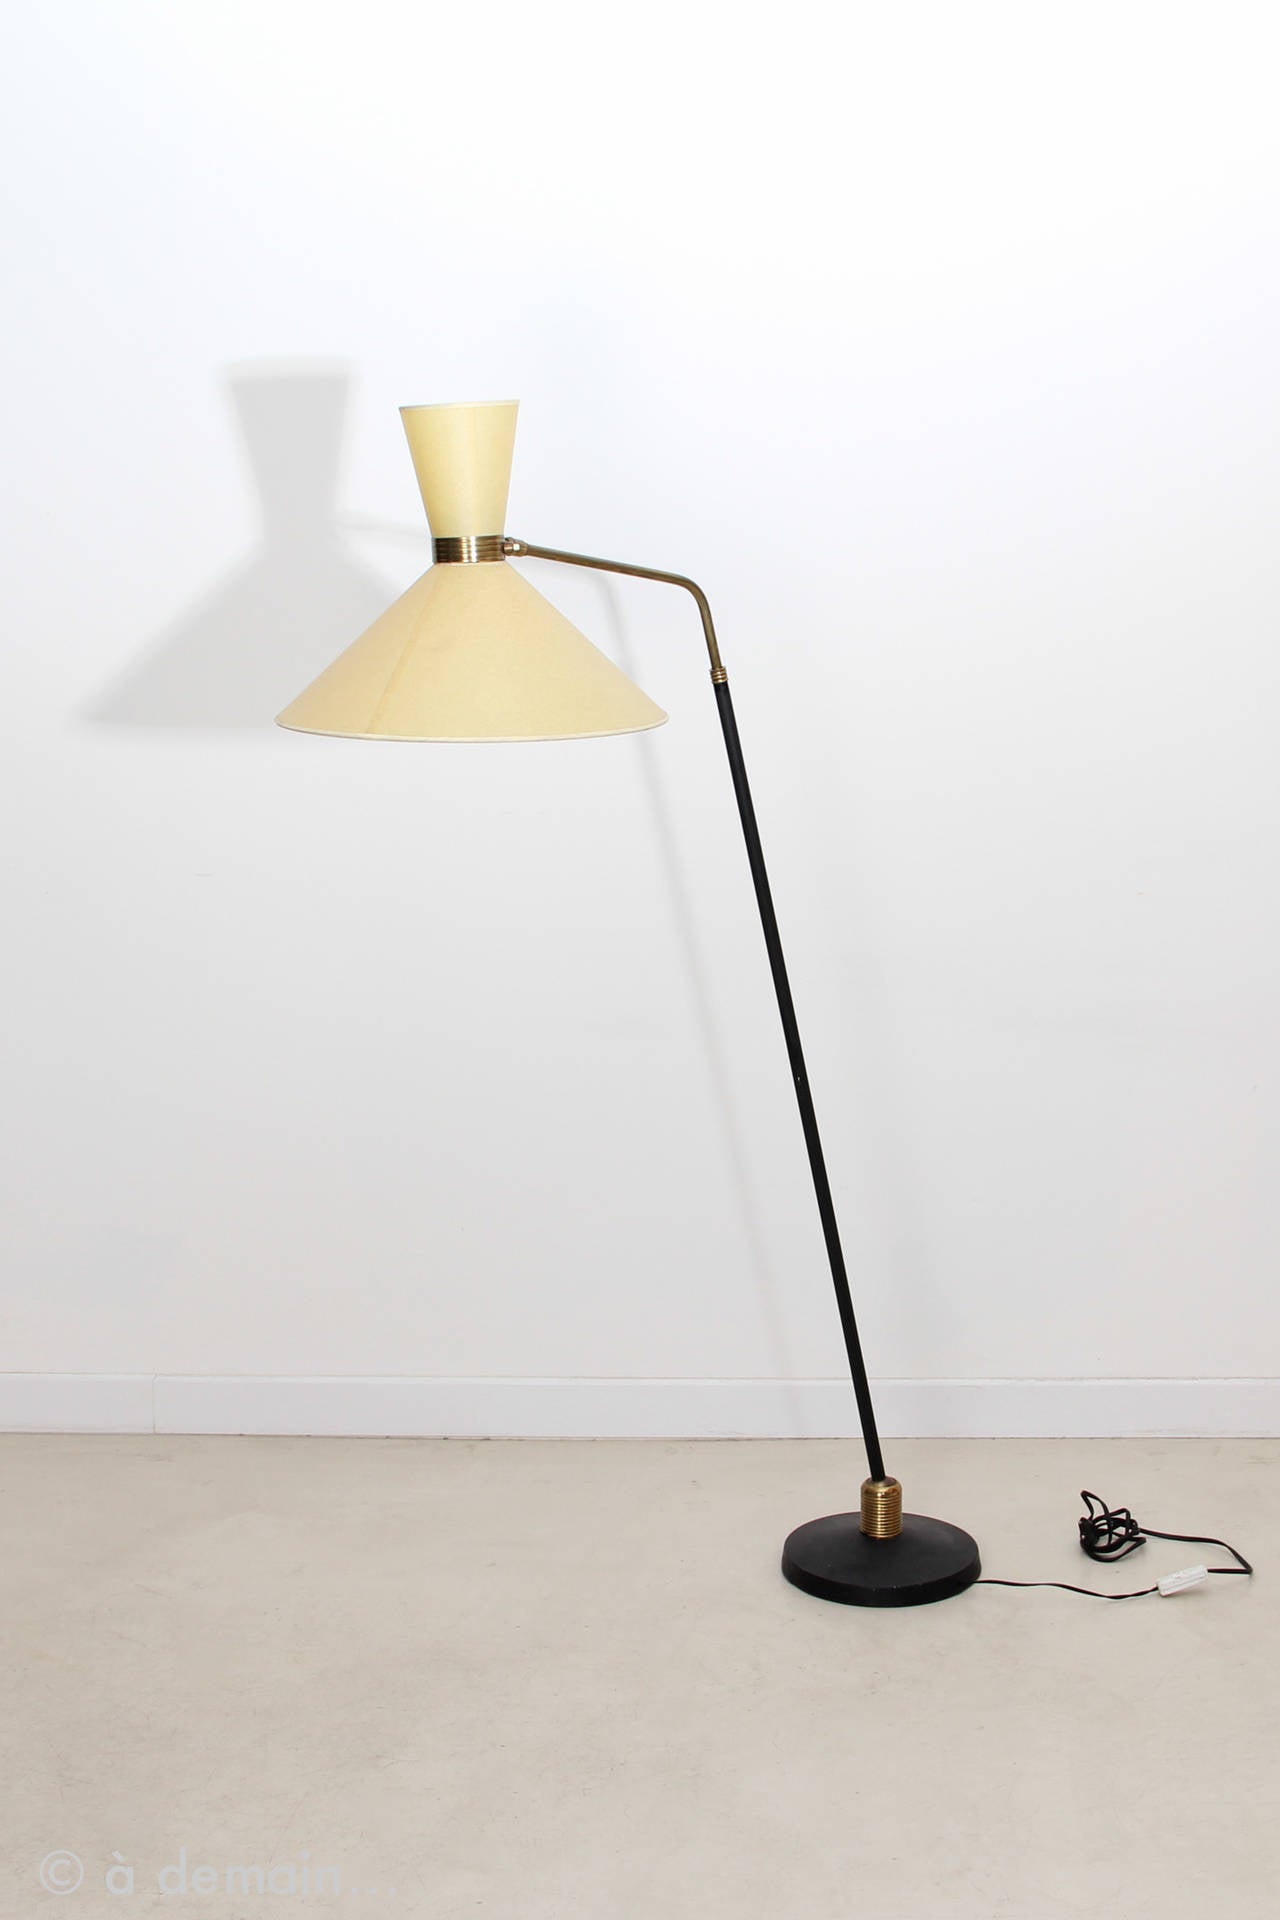 Rare floor lamp attributed to Pierre Guariche and edited by Lunel in the 1950s.
Adjustable height and swivelling lampshade and rod.
Pretty shape of the rare and delicate paper lampshade.

Height: 150 cm. 
Lampshade diameter: 39 cm.